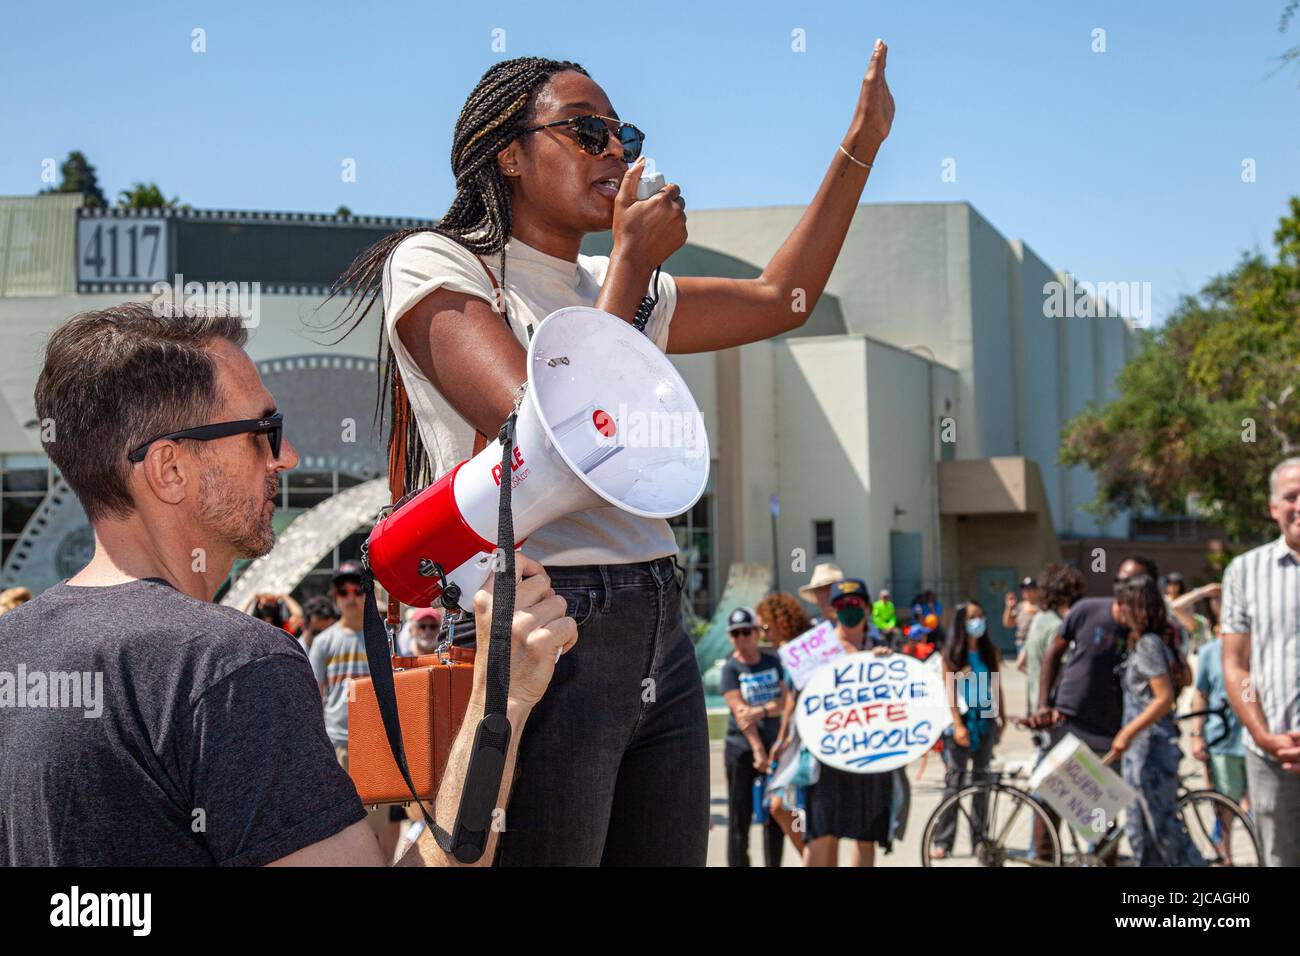 Council member Yasmine-Imani McMorrin is the first African American woman elected to the Culver City City Council. March for Life rally in Culver City June 11 2022, Los Angeles, California, USA Stock Photo